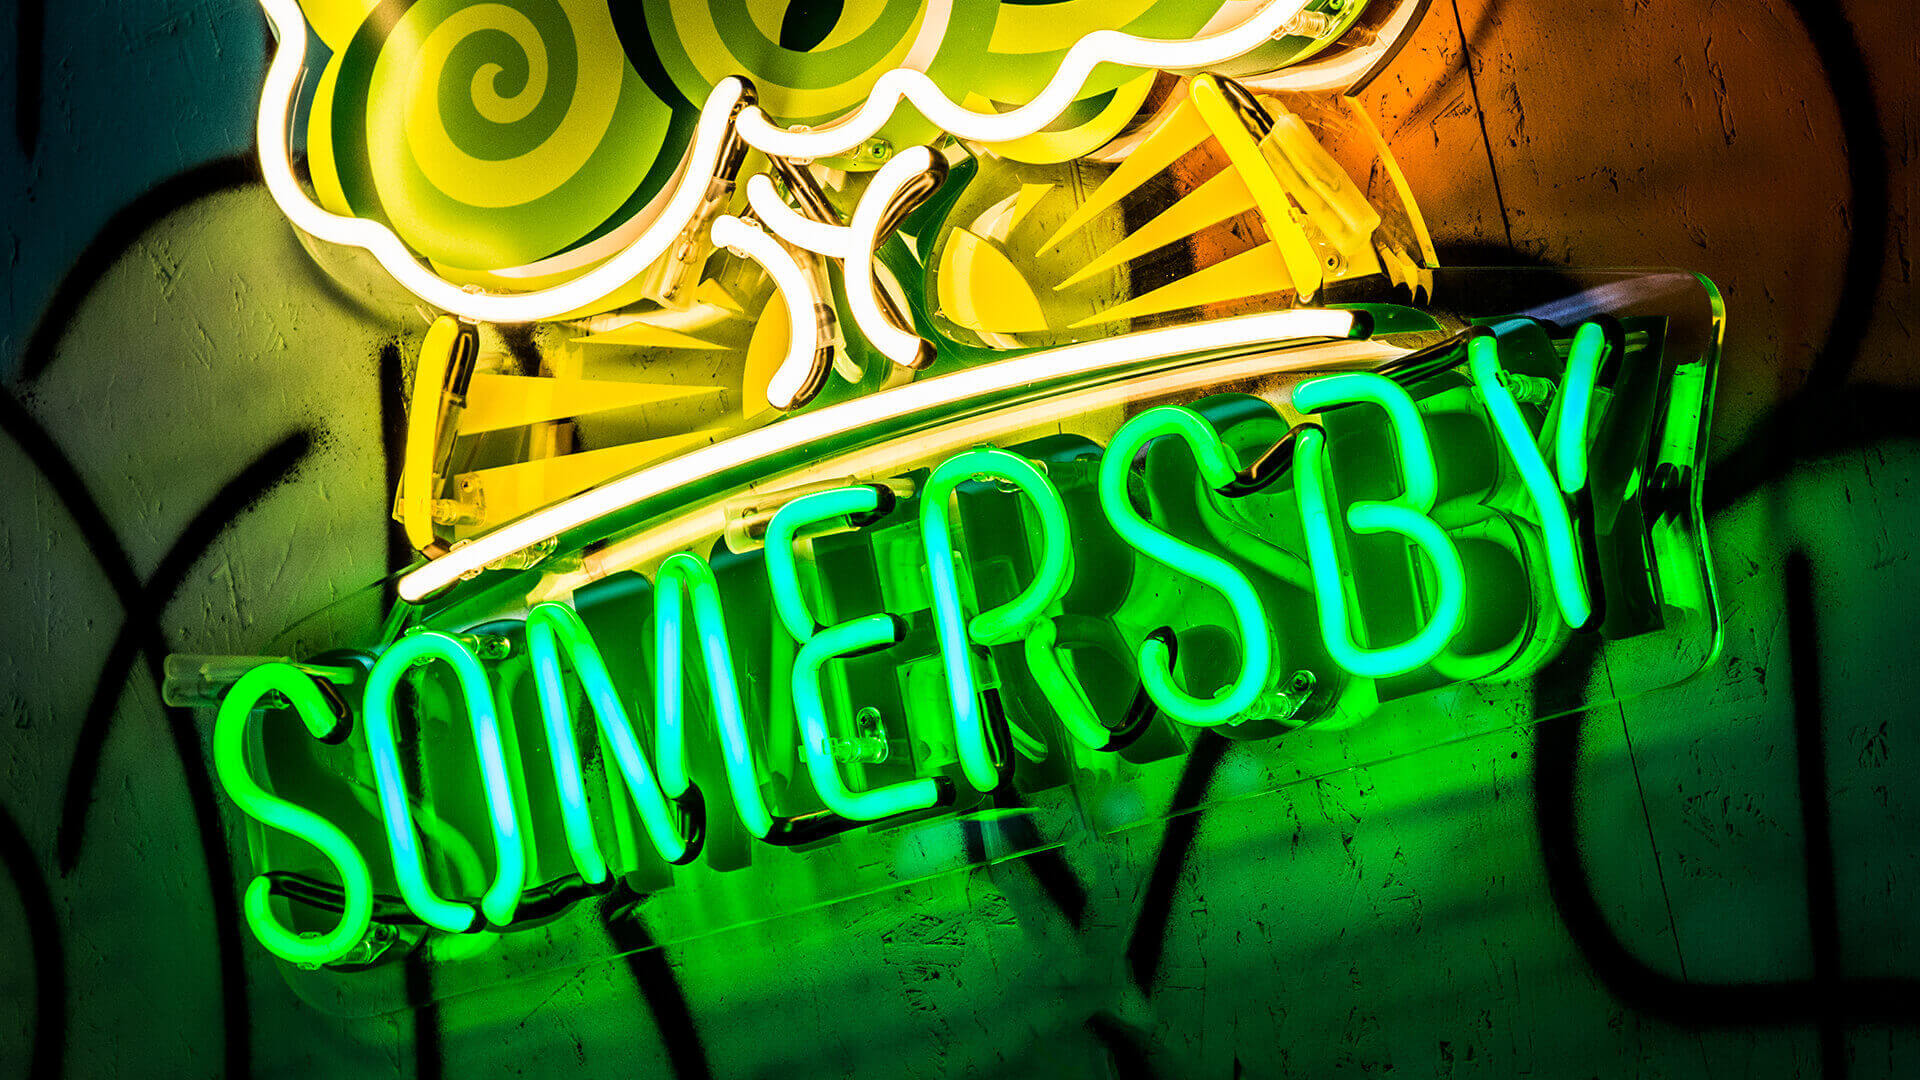 somersby somersbi - somersby-neon-tree-on-a-colour-wall-neon-behind-the-bar-neon-in-a-container-wall-under-lighted-wall-con-company-logo-neon-on-electricity-advertising-beer-letter-neon-electricity-street (4)